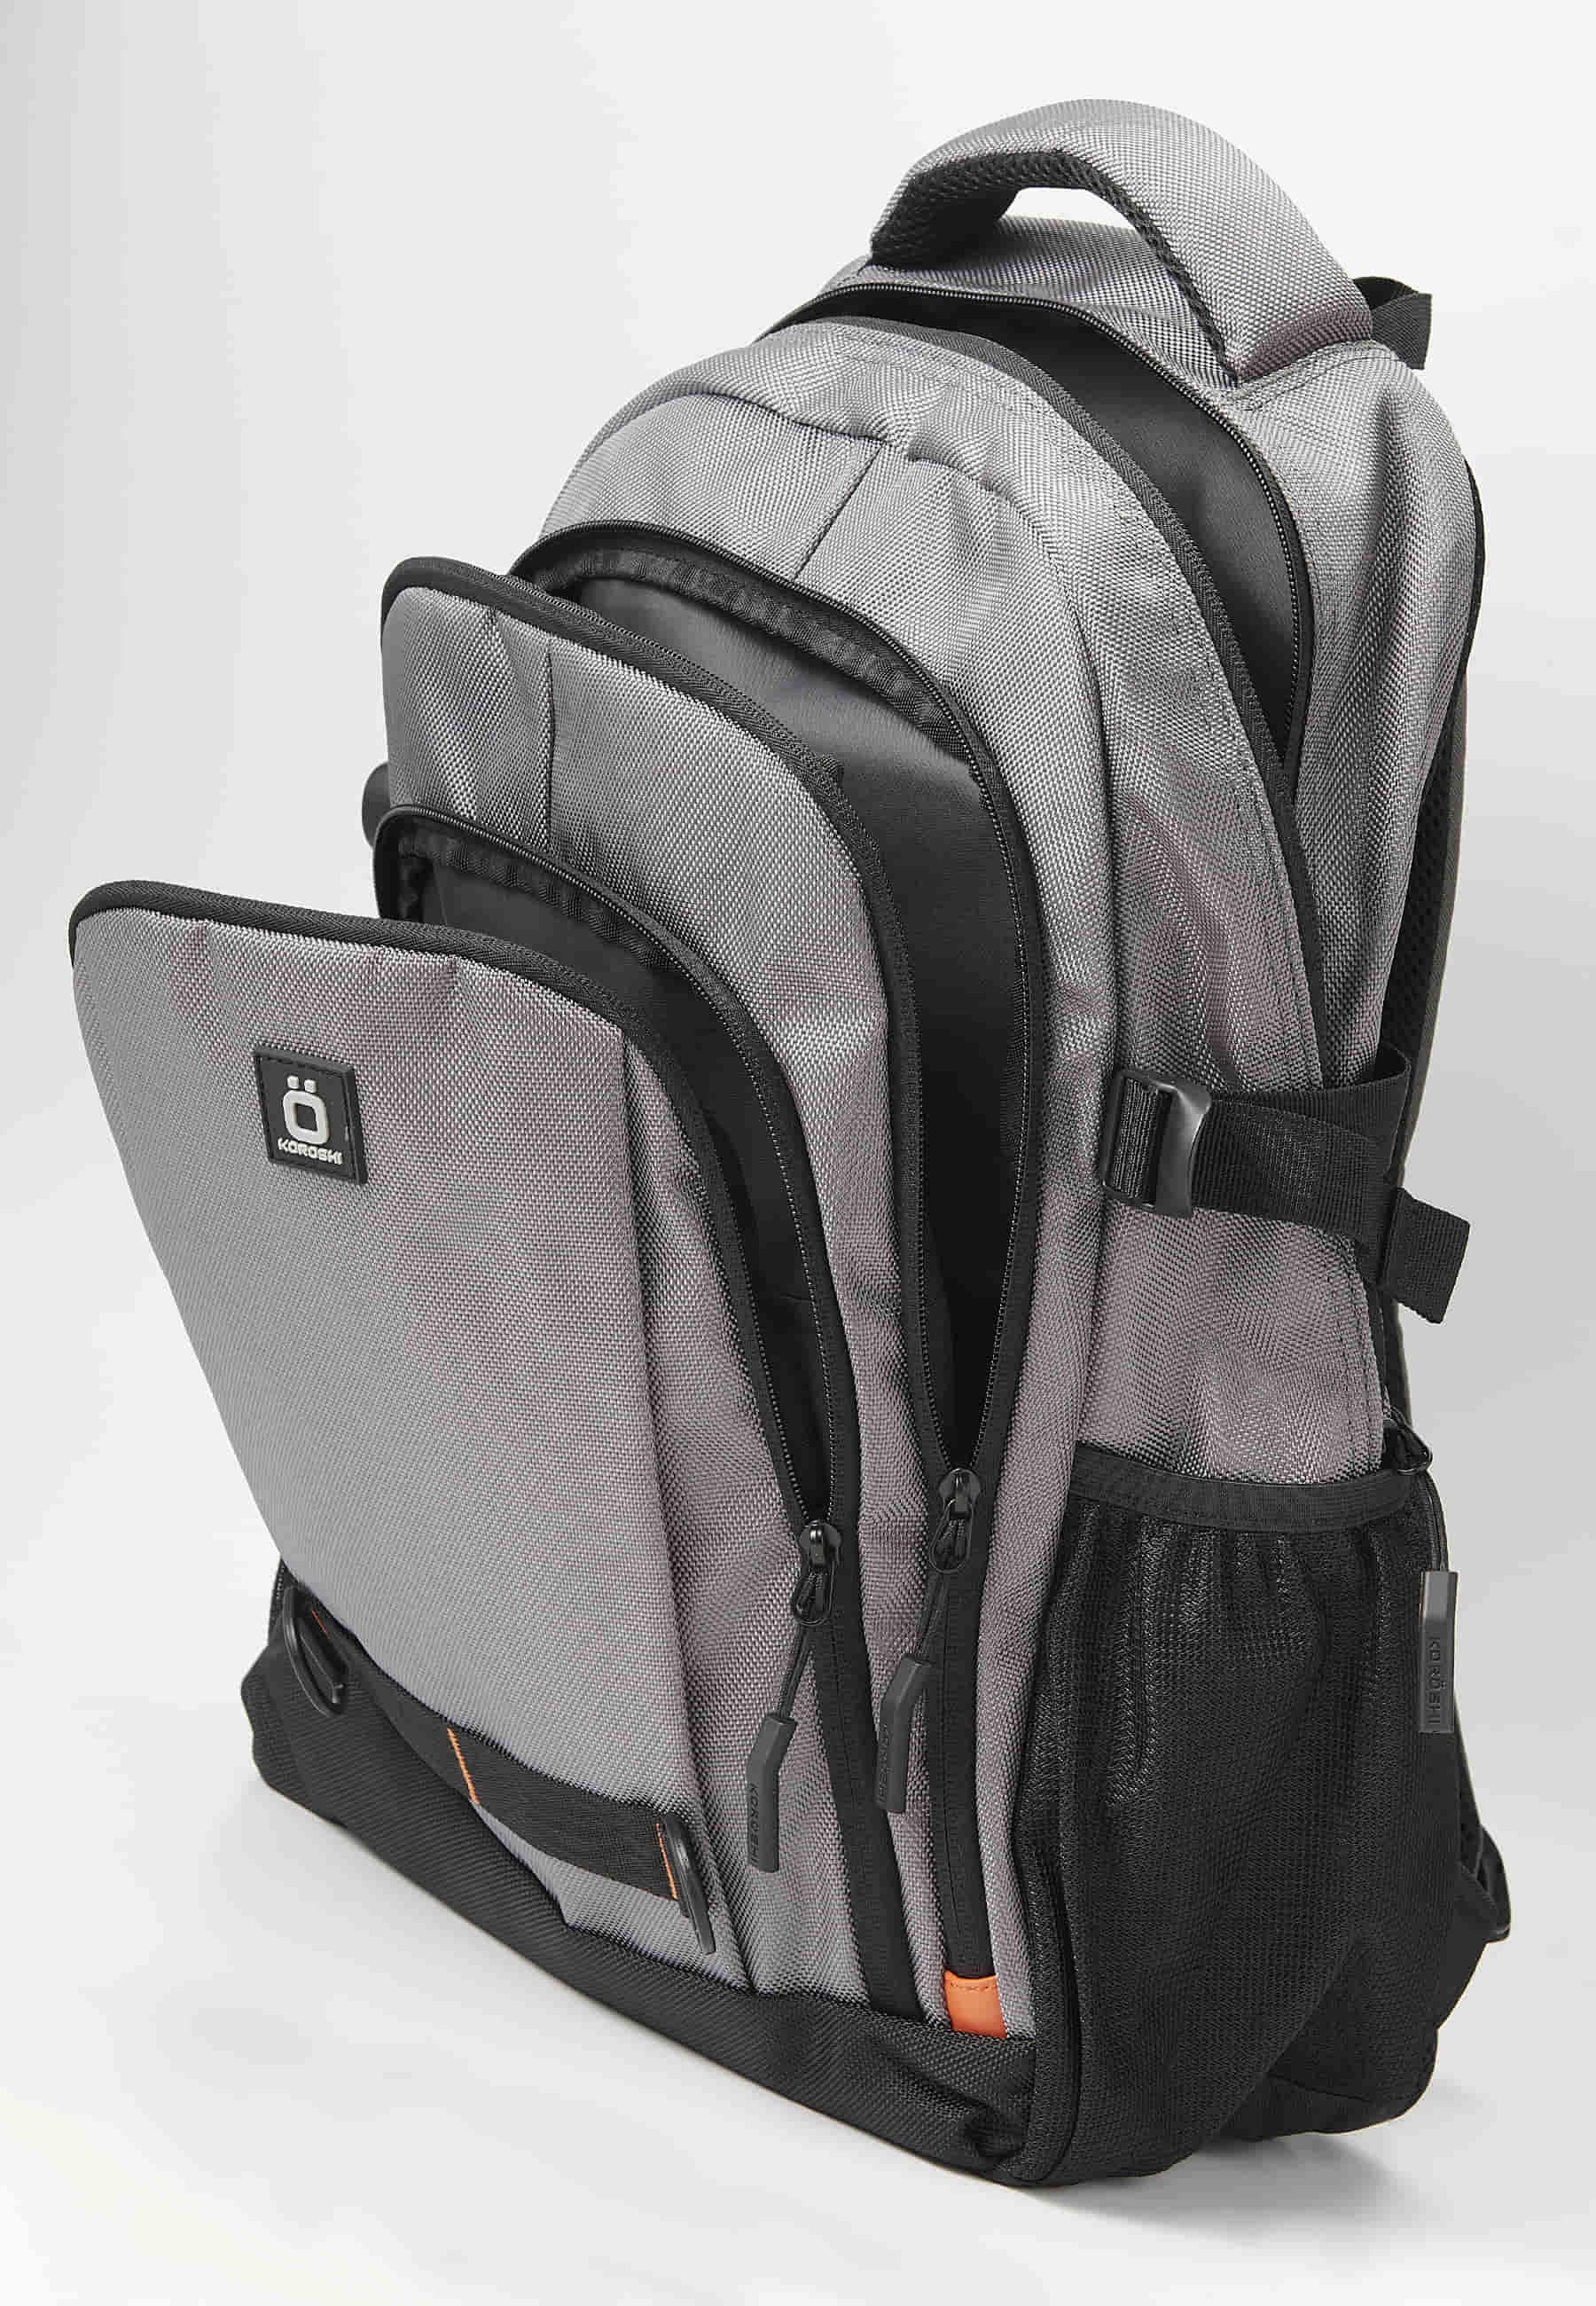 Koröshi backpack with three zippered compartments, one for laptop, with Gray interior pockets 4